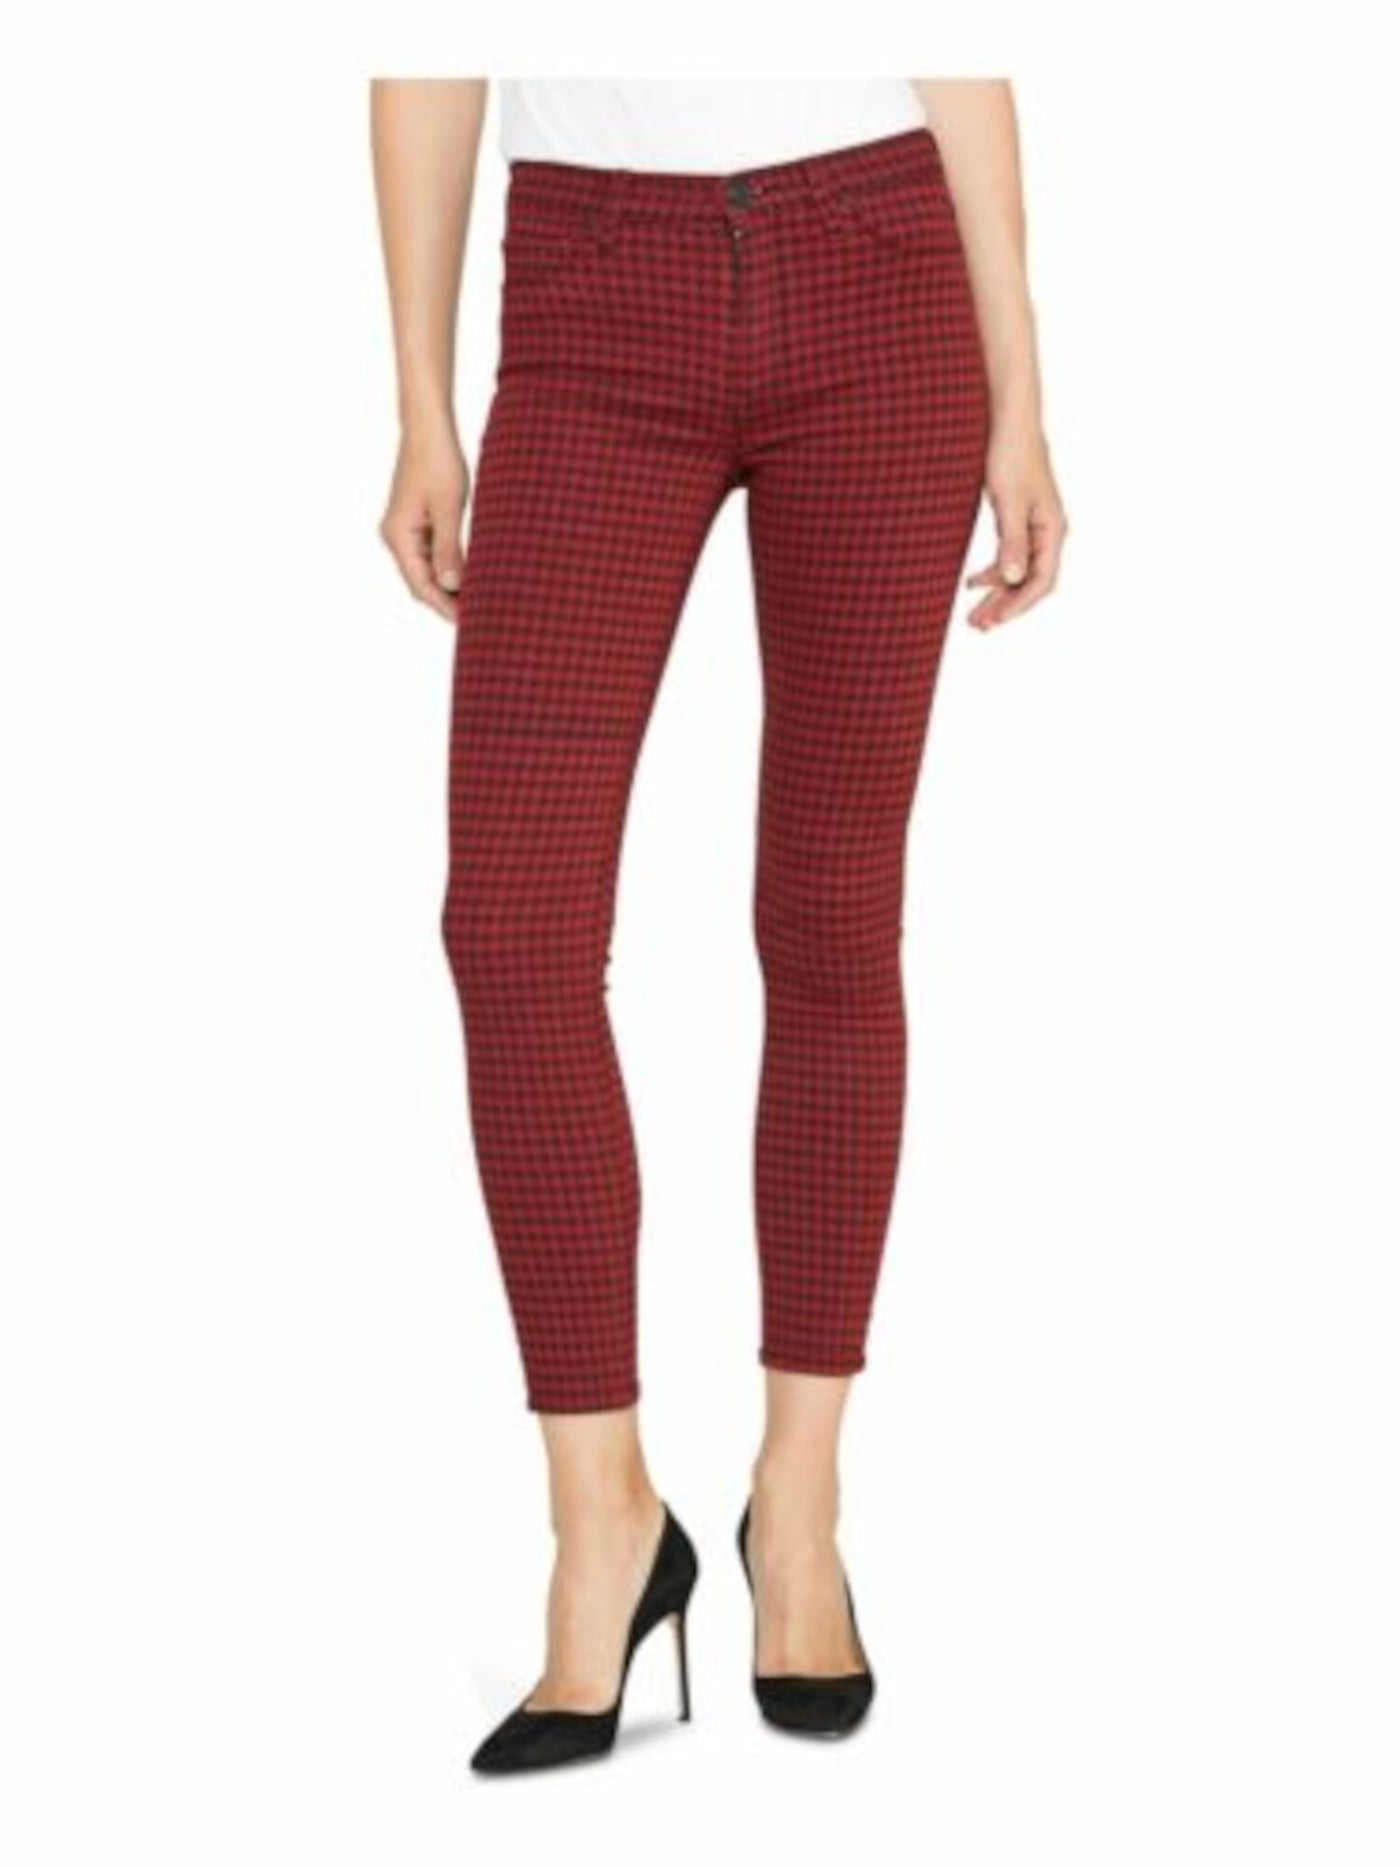 HUDSON Womens Red Houndstooth Skinny Pants Size: 27 Waist